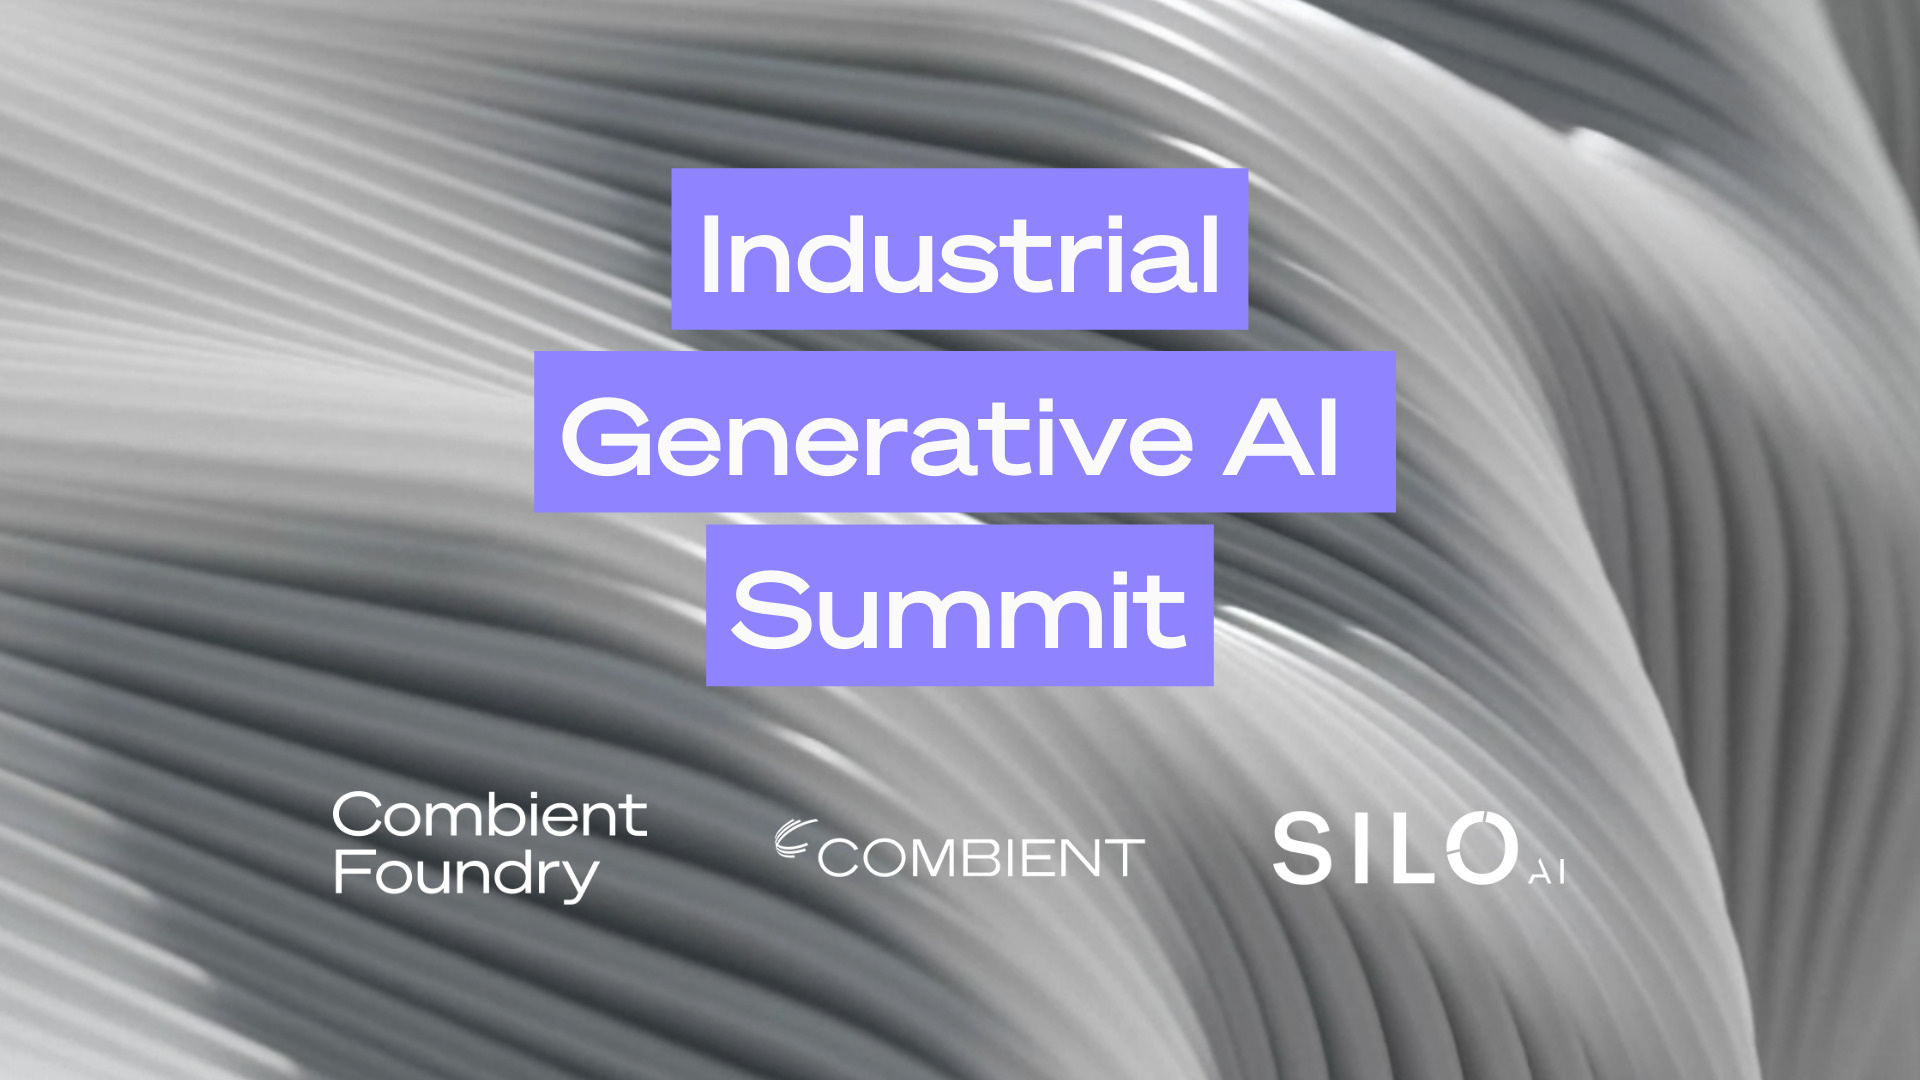 Industrial Generative AI Summit - Combient Foundry